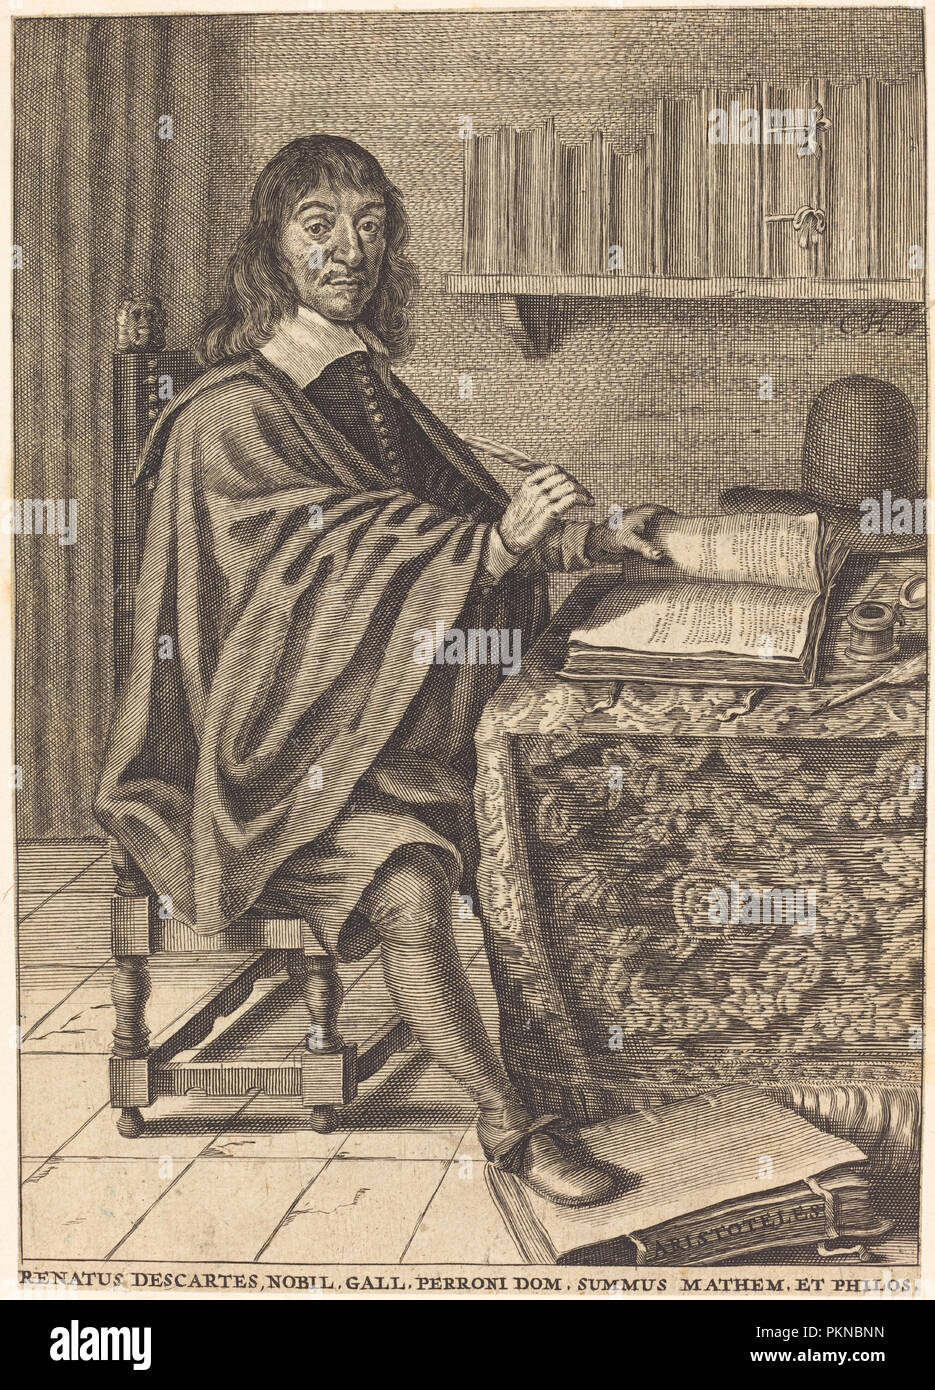 René Descartes. Dimensions: sheet (trimmed within plate mark): 19.4 x 13.8 cm (7 5/8 x 5 7/16 in.). Medium: engraving on laid paper. Museum: National Gallery of Art, Washington DC. Author: French 17th Century. Stock Photo